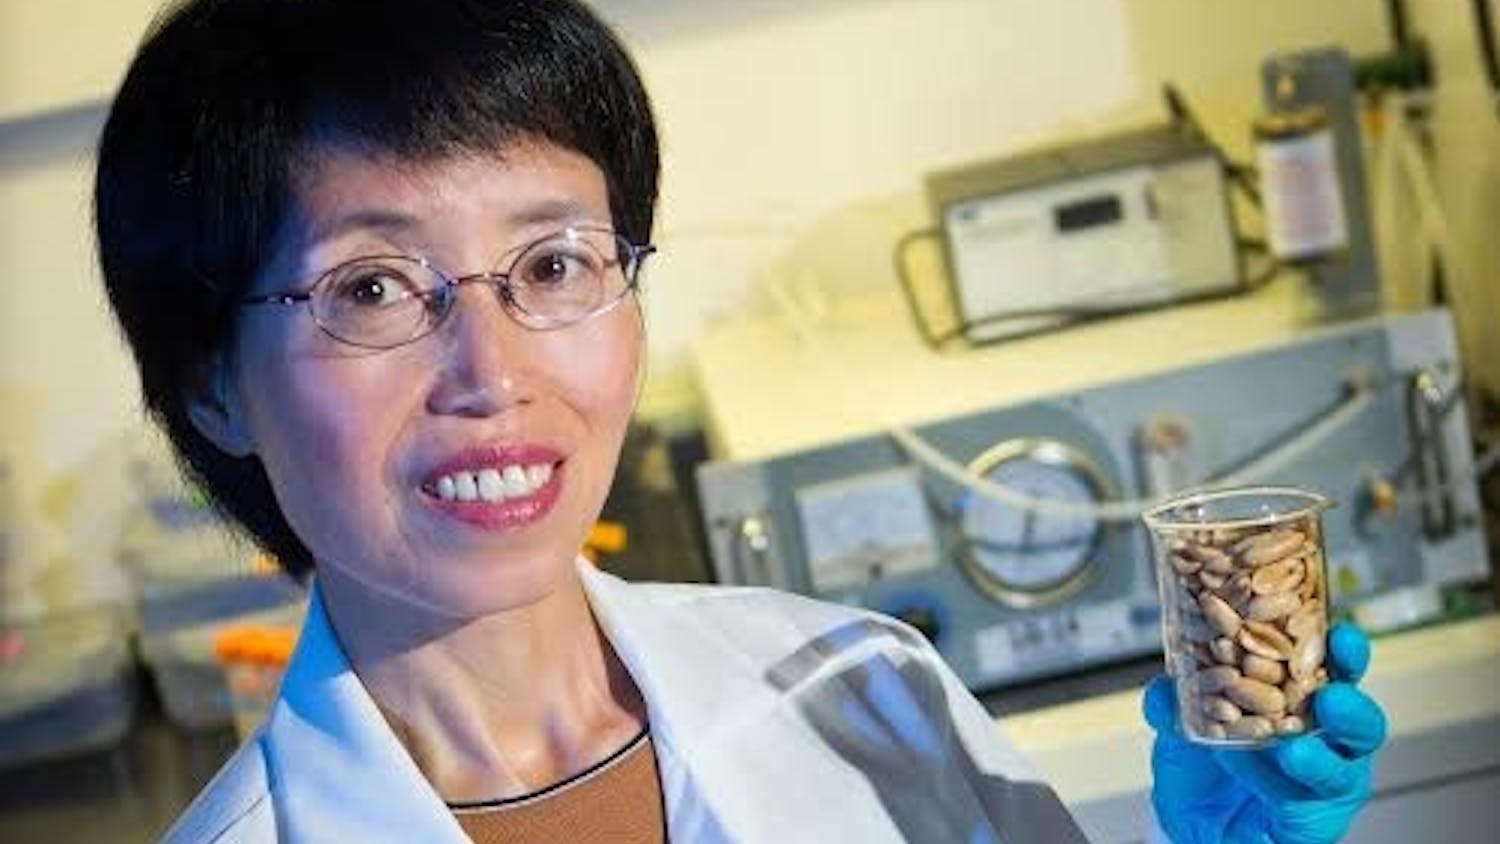 Dr. Jianmei Yu, a food science researcher in the College of Agriculture and Environmental Sciences at N.C. A&T,  who has patented research into decreasing allergens in peanuts. The process retains the quality and functionality of whole, roasted peanuts, and can easily be integrated into existing food production processes.